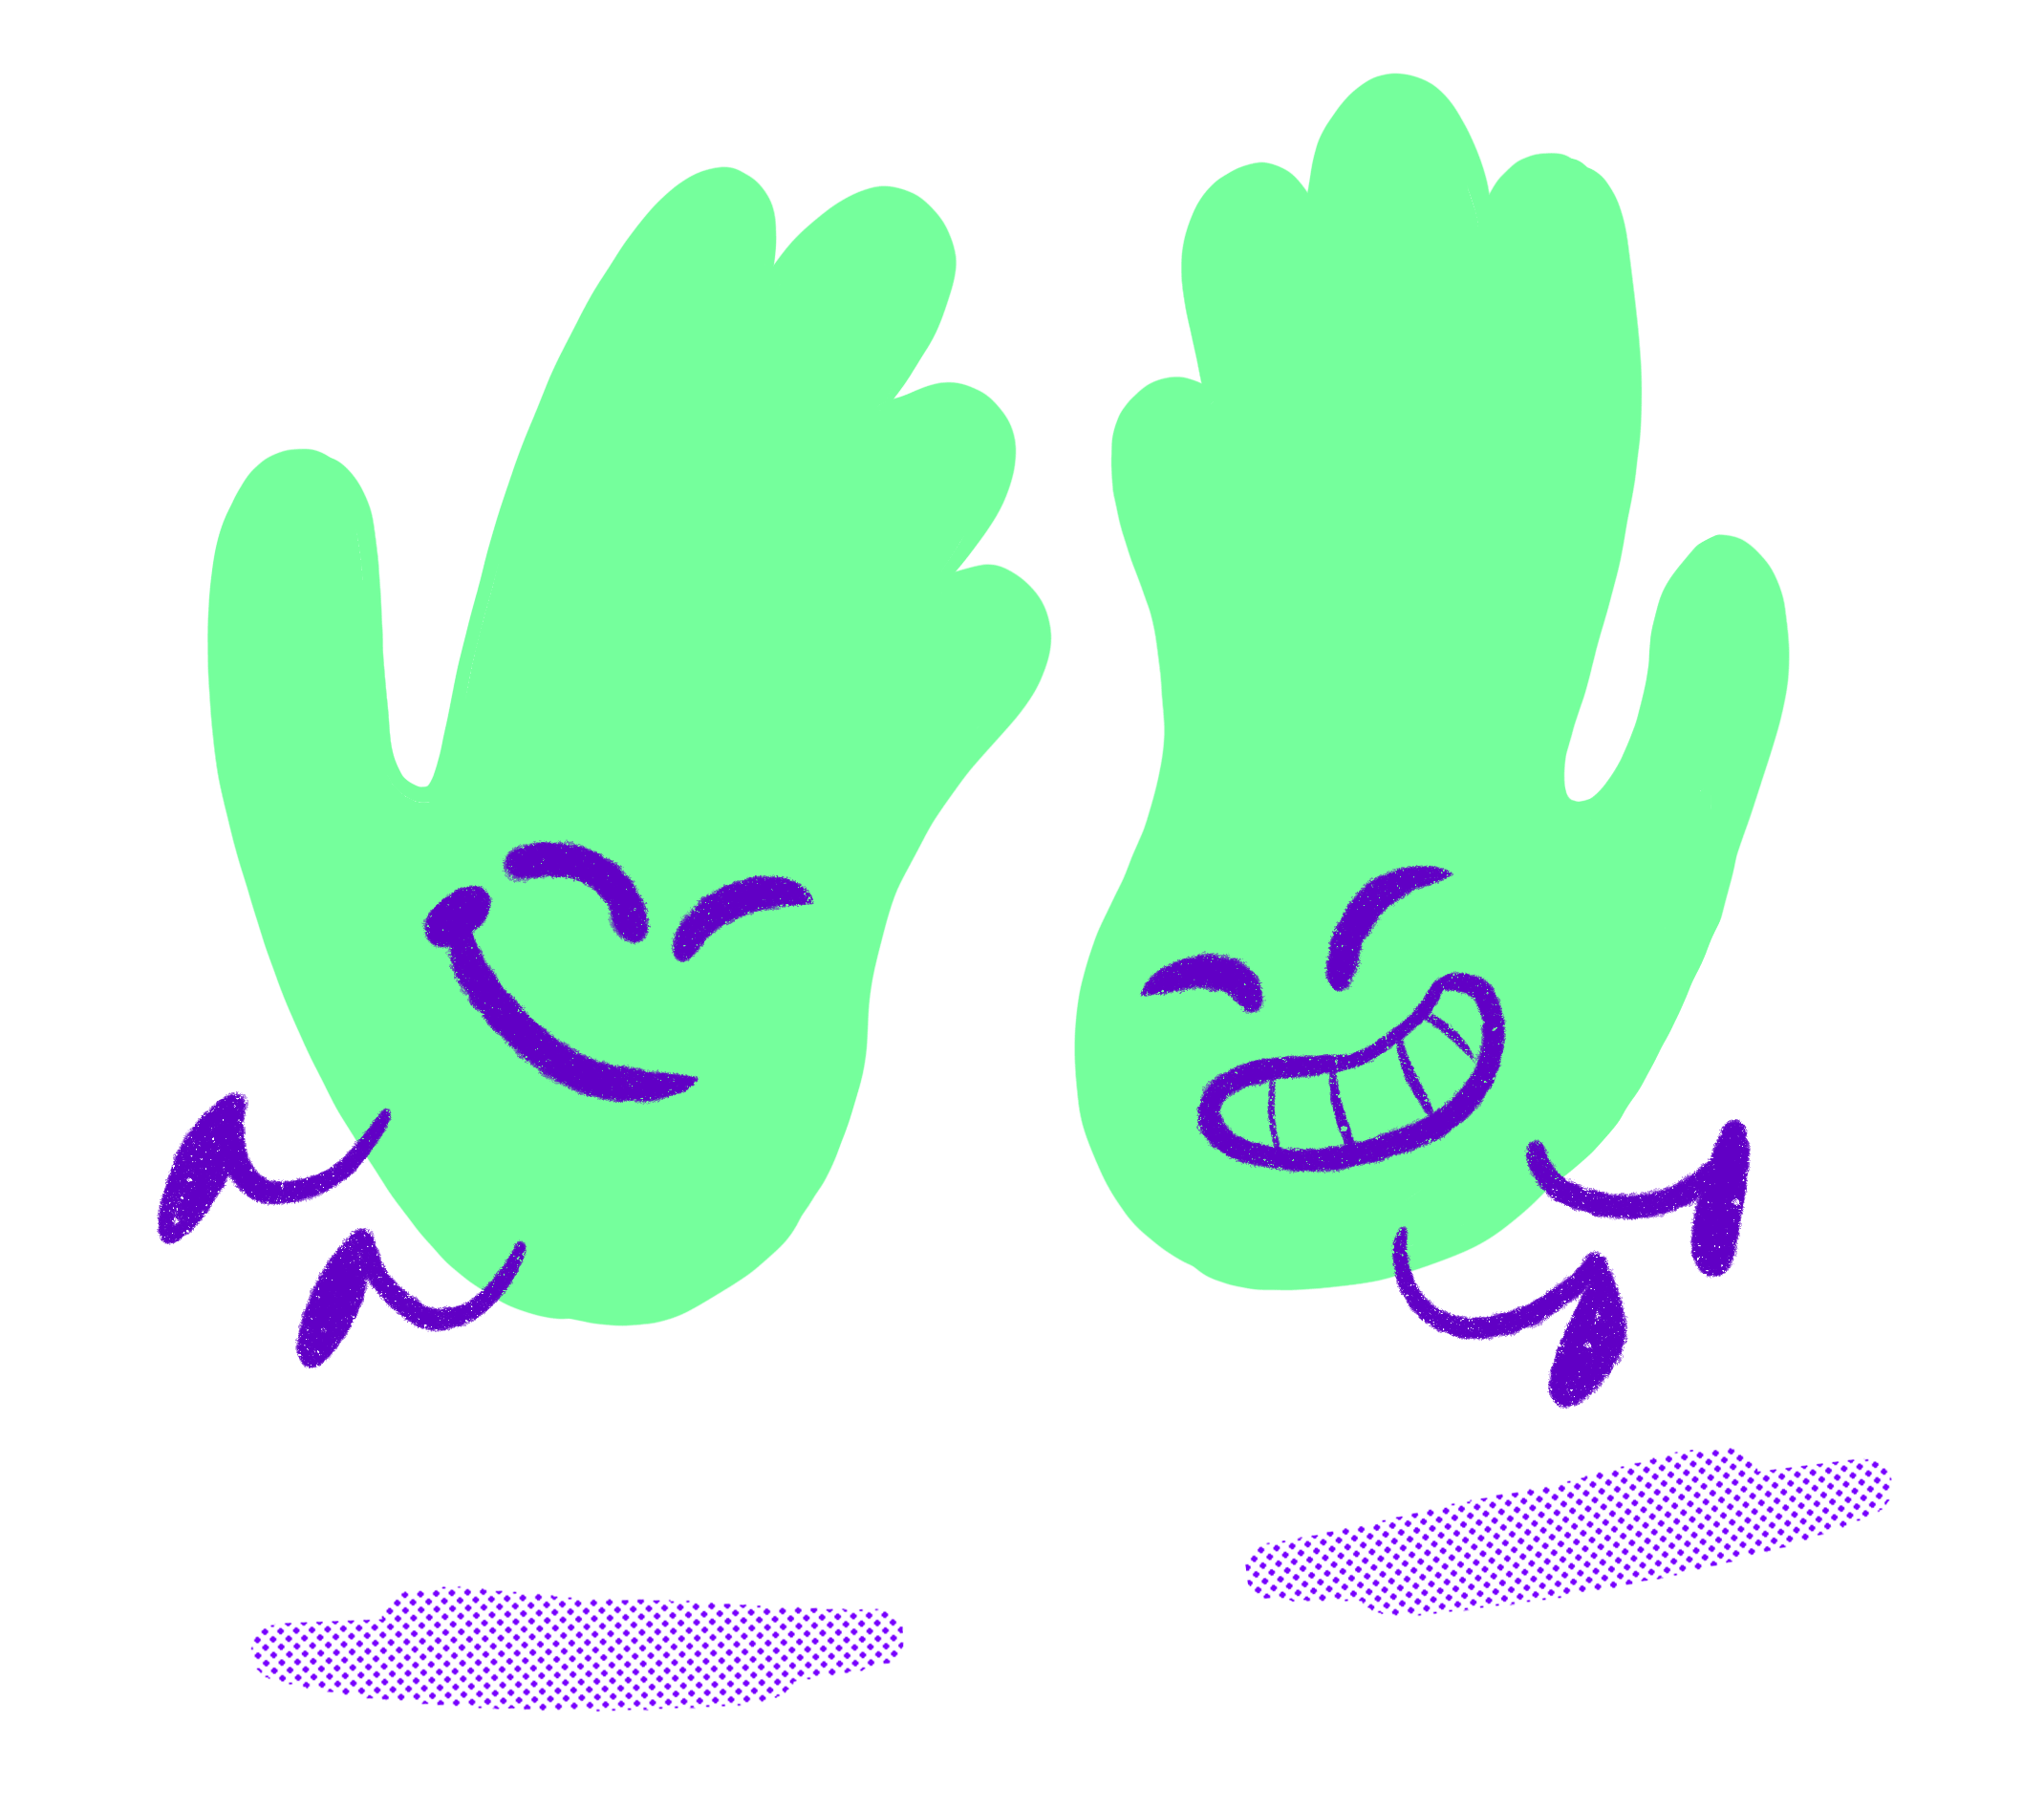 Two Signalise hands happy